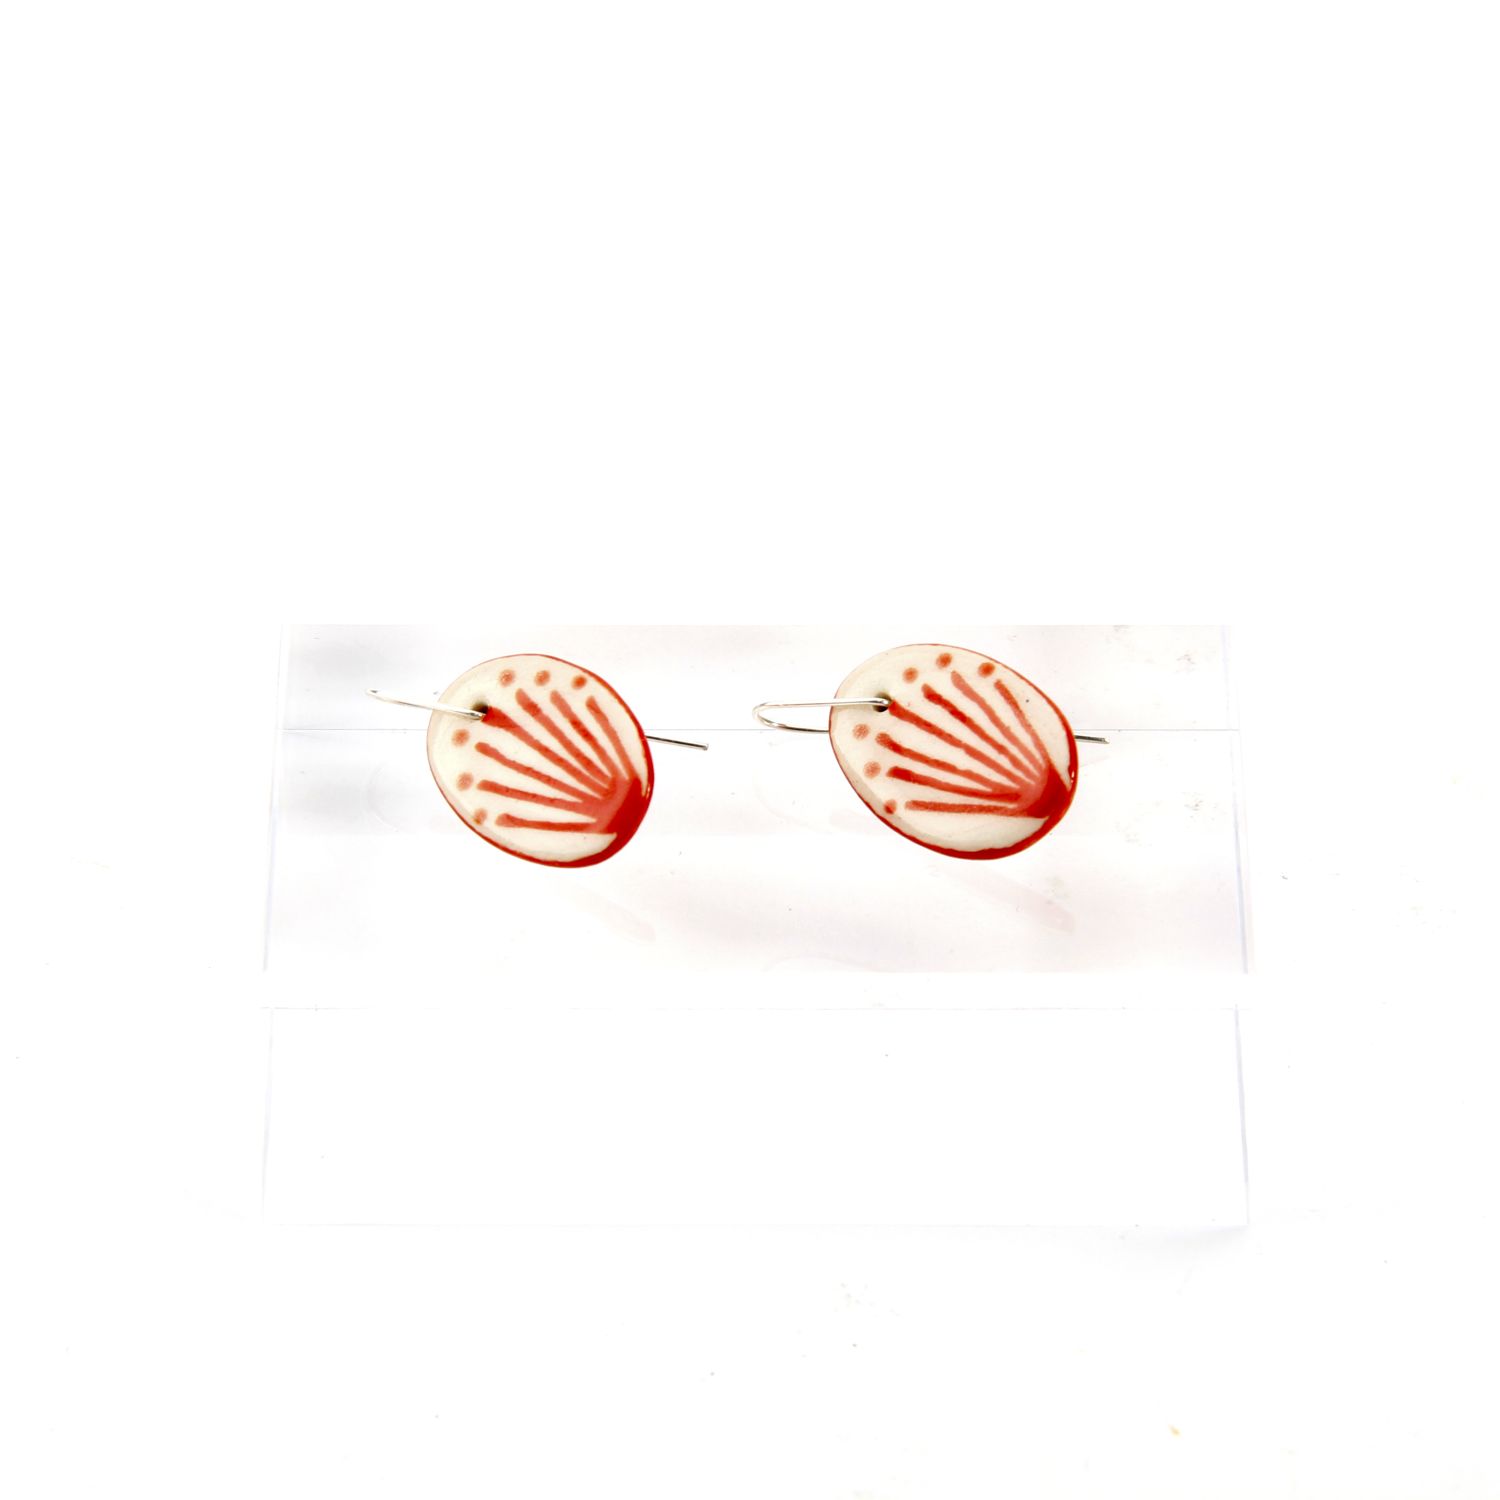 Here and Here: Small Disc Earrings with Radiating Lines and Dots Product Image 1 of 1